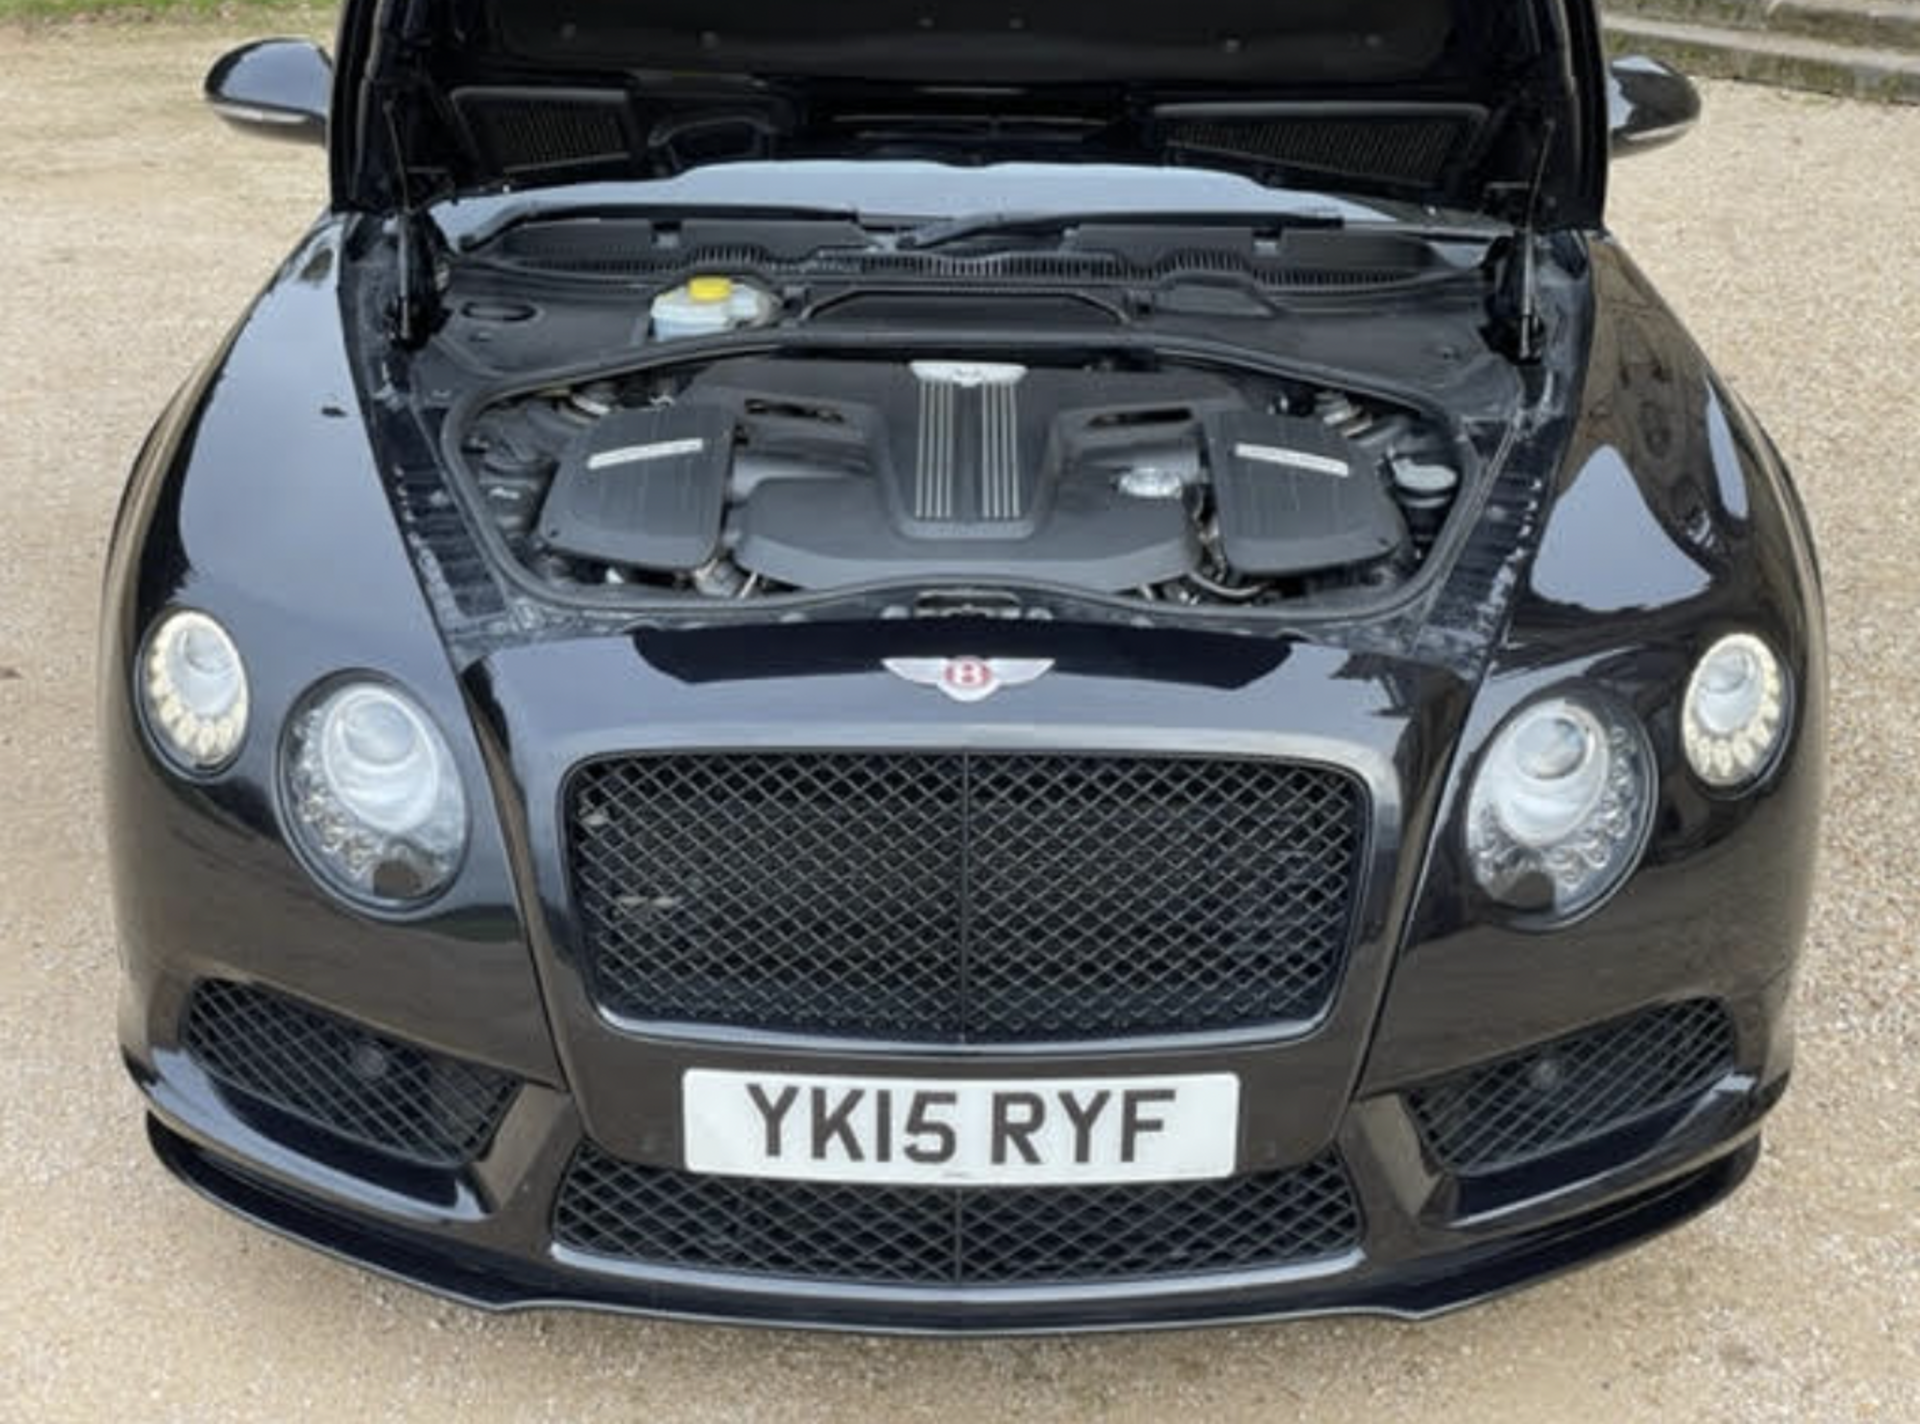 2015 Bentley Continental GTC 4.0 V8 S 2dr Auto Concourse series - Black pack 58,000 miles Full S/H - Image 10 of 18